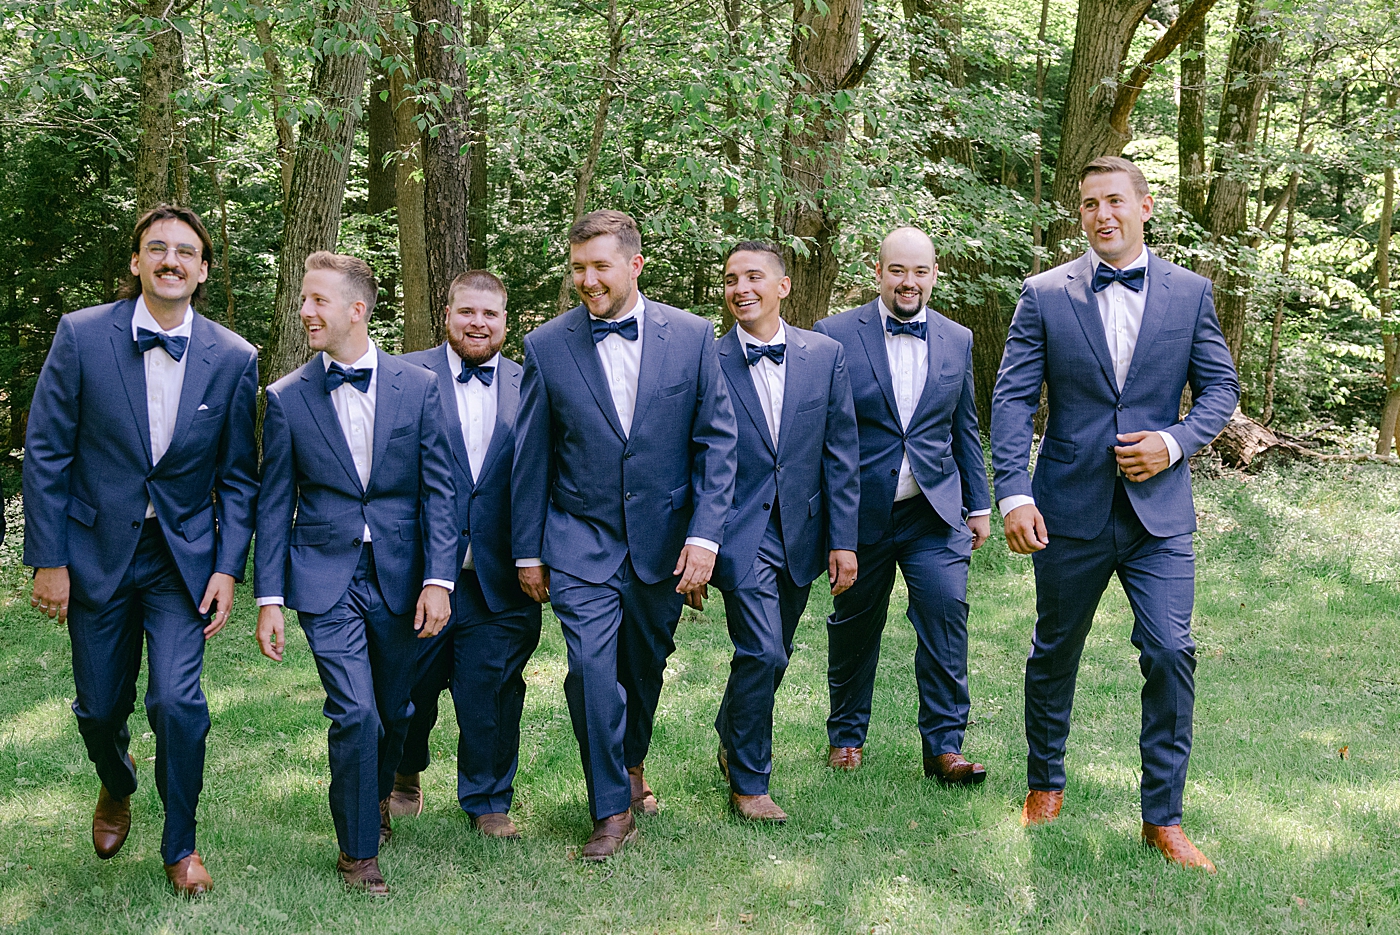 Groom with groomsmen laughing while walking | Image by Hudson Valley Wedding Photographer Hope Helmuth